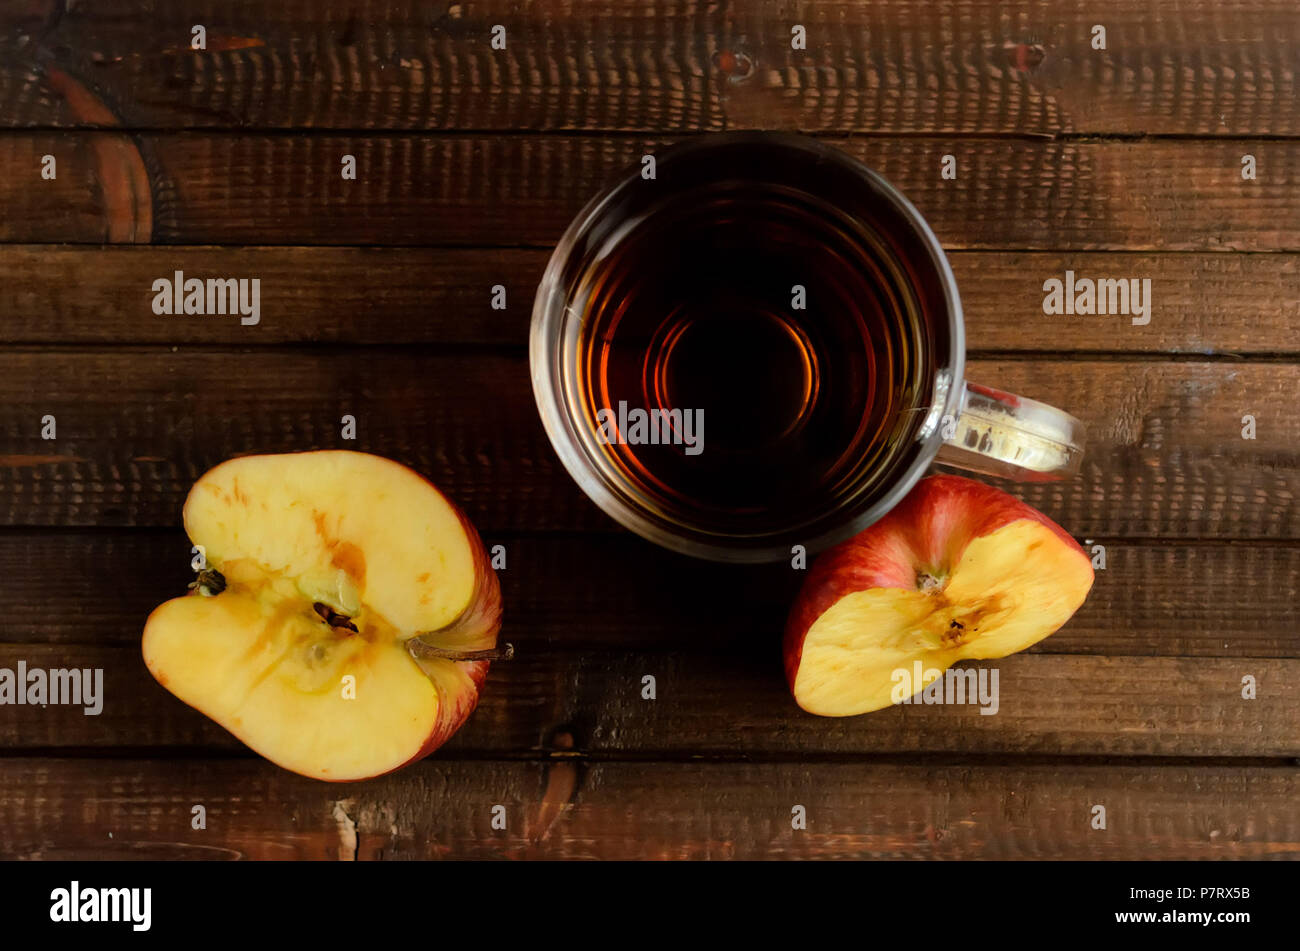 The glass of apple cider vinegar and two red halves of the apple on wooden background. Two red halves of the apple darkens on the cut. Flat lay view. Stock Photo